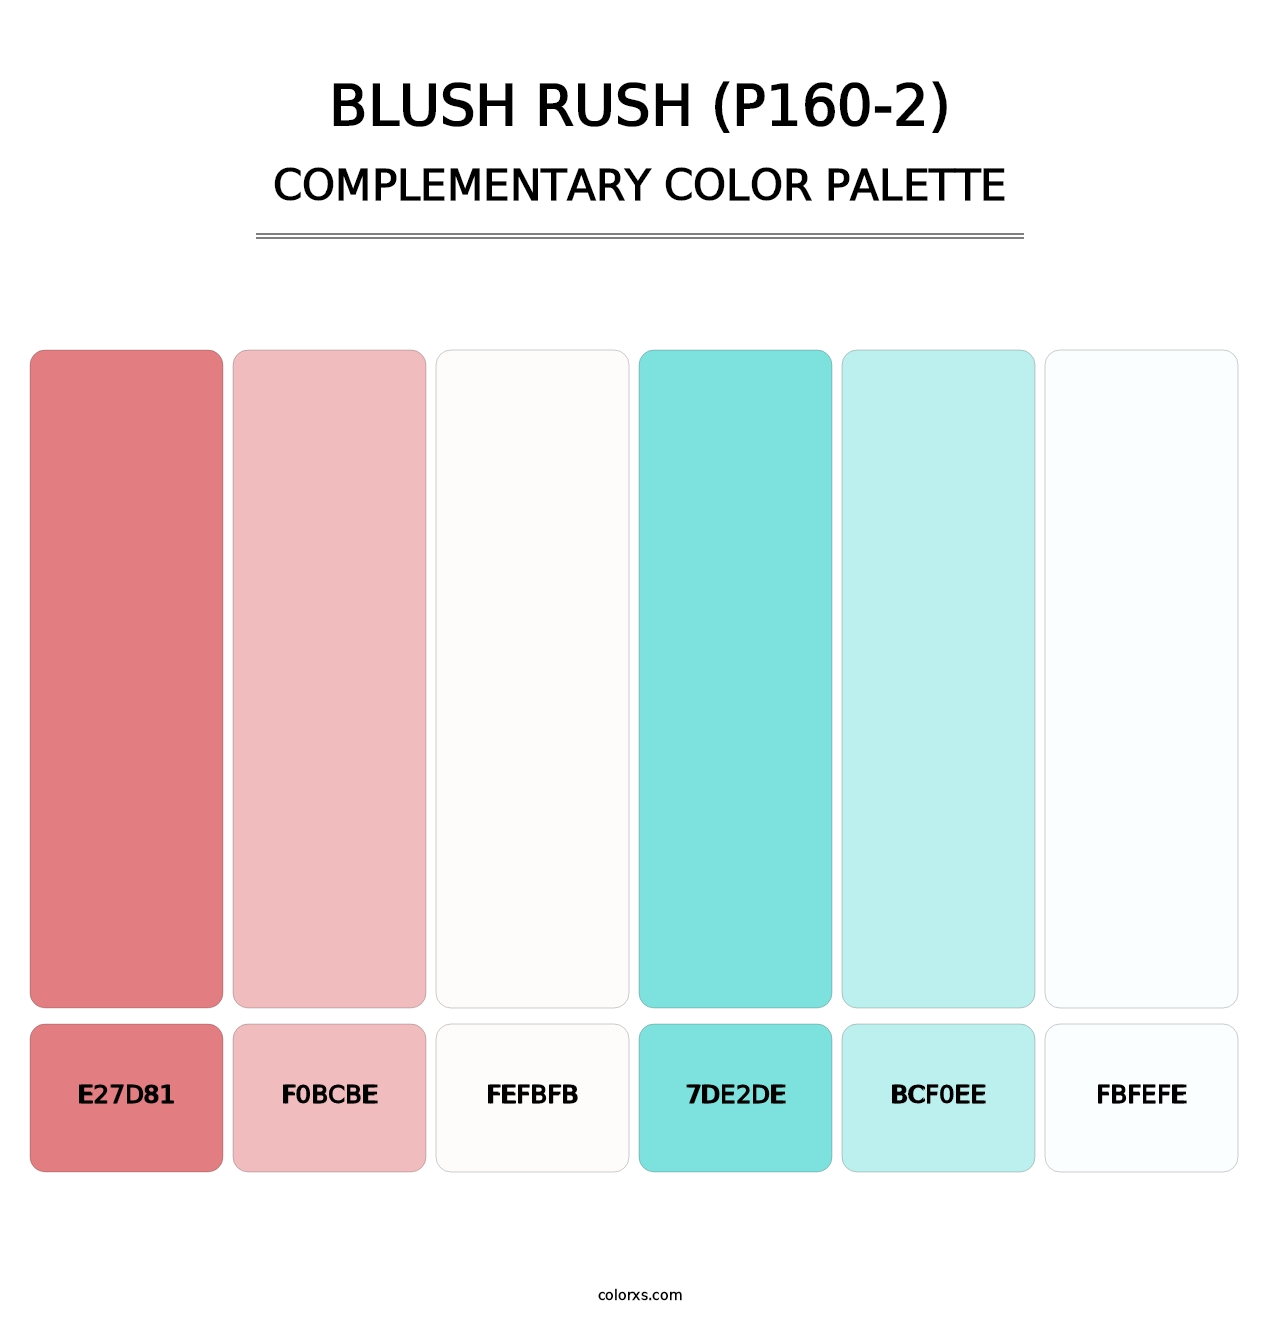 Blush Rush (P160-2) - Complementary Color Palette